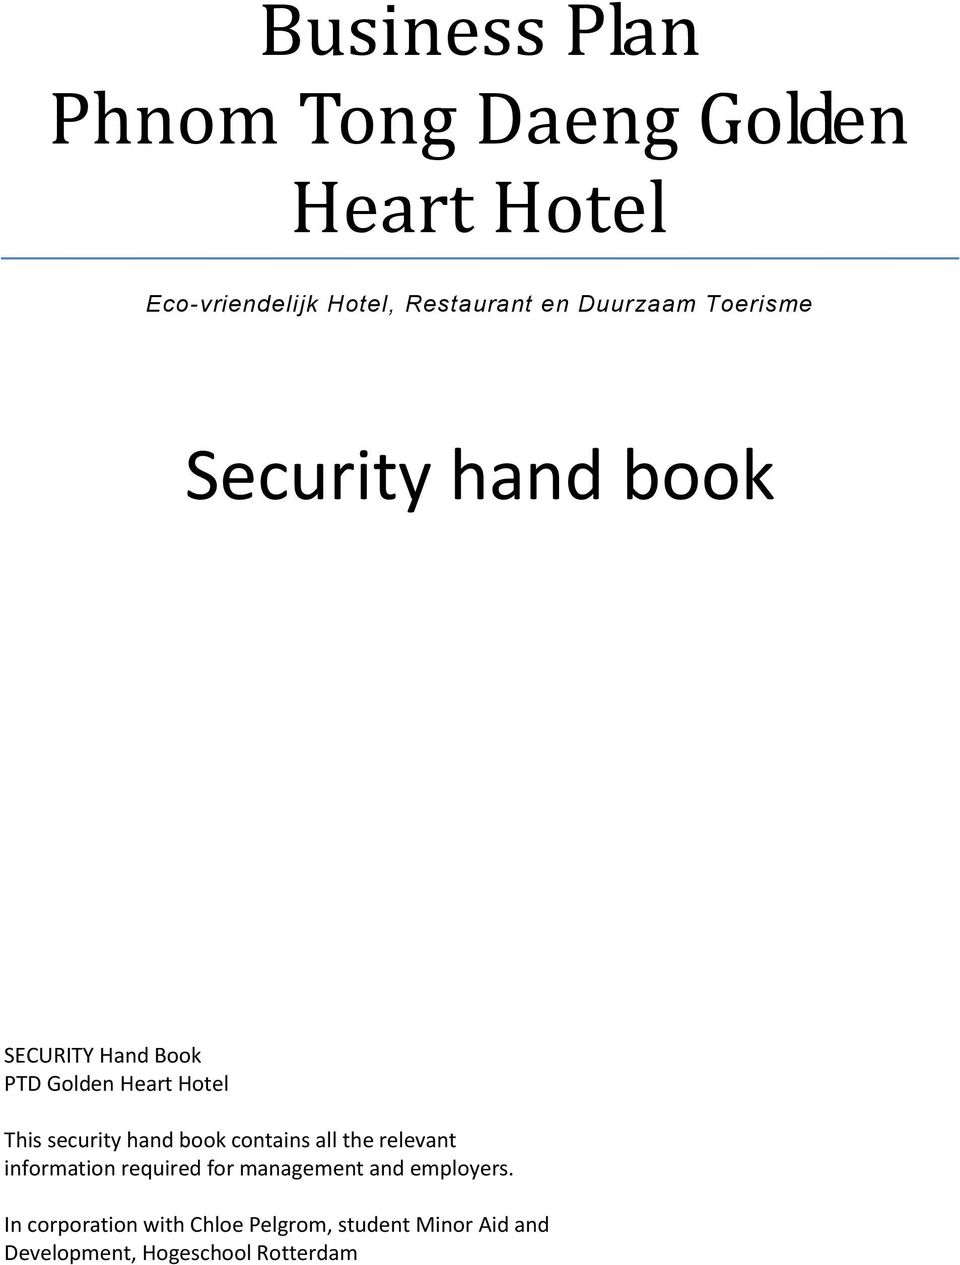 security hand book contains all the relevant information required for management and